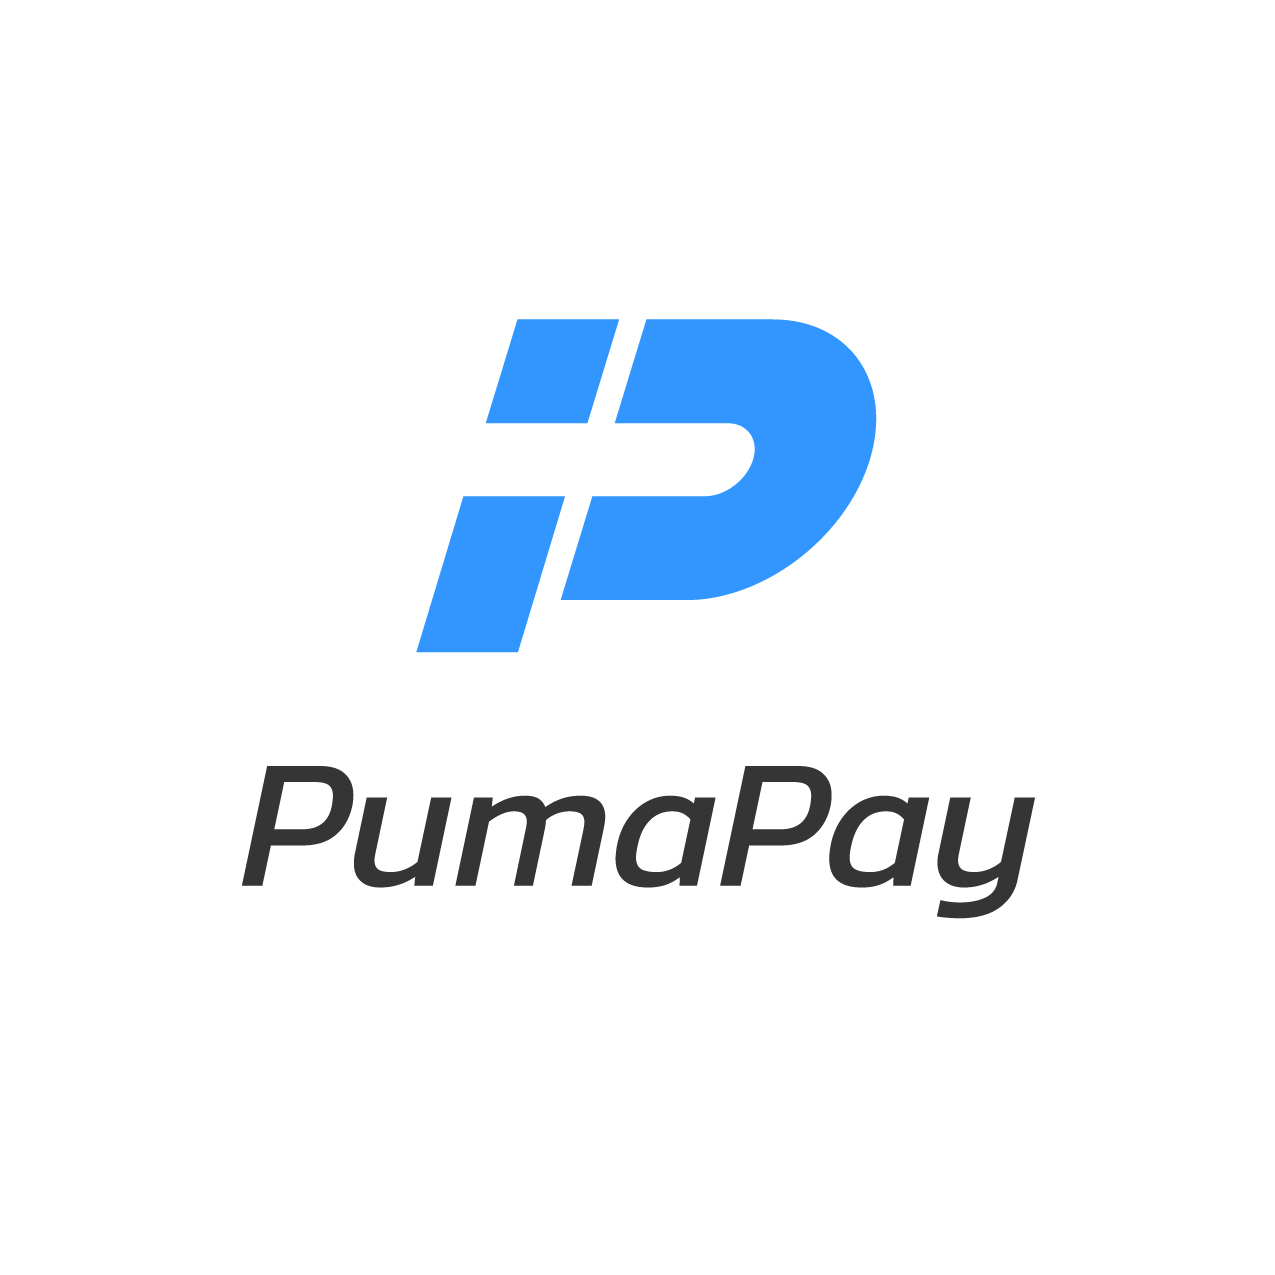 PumaPay's Blockchain Powered Payment Solution PullPayment Now Live On Mainnet